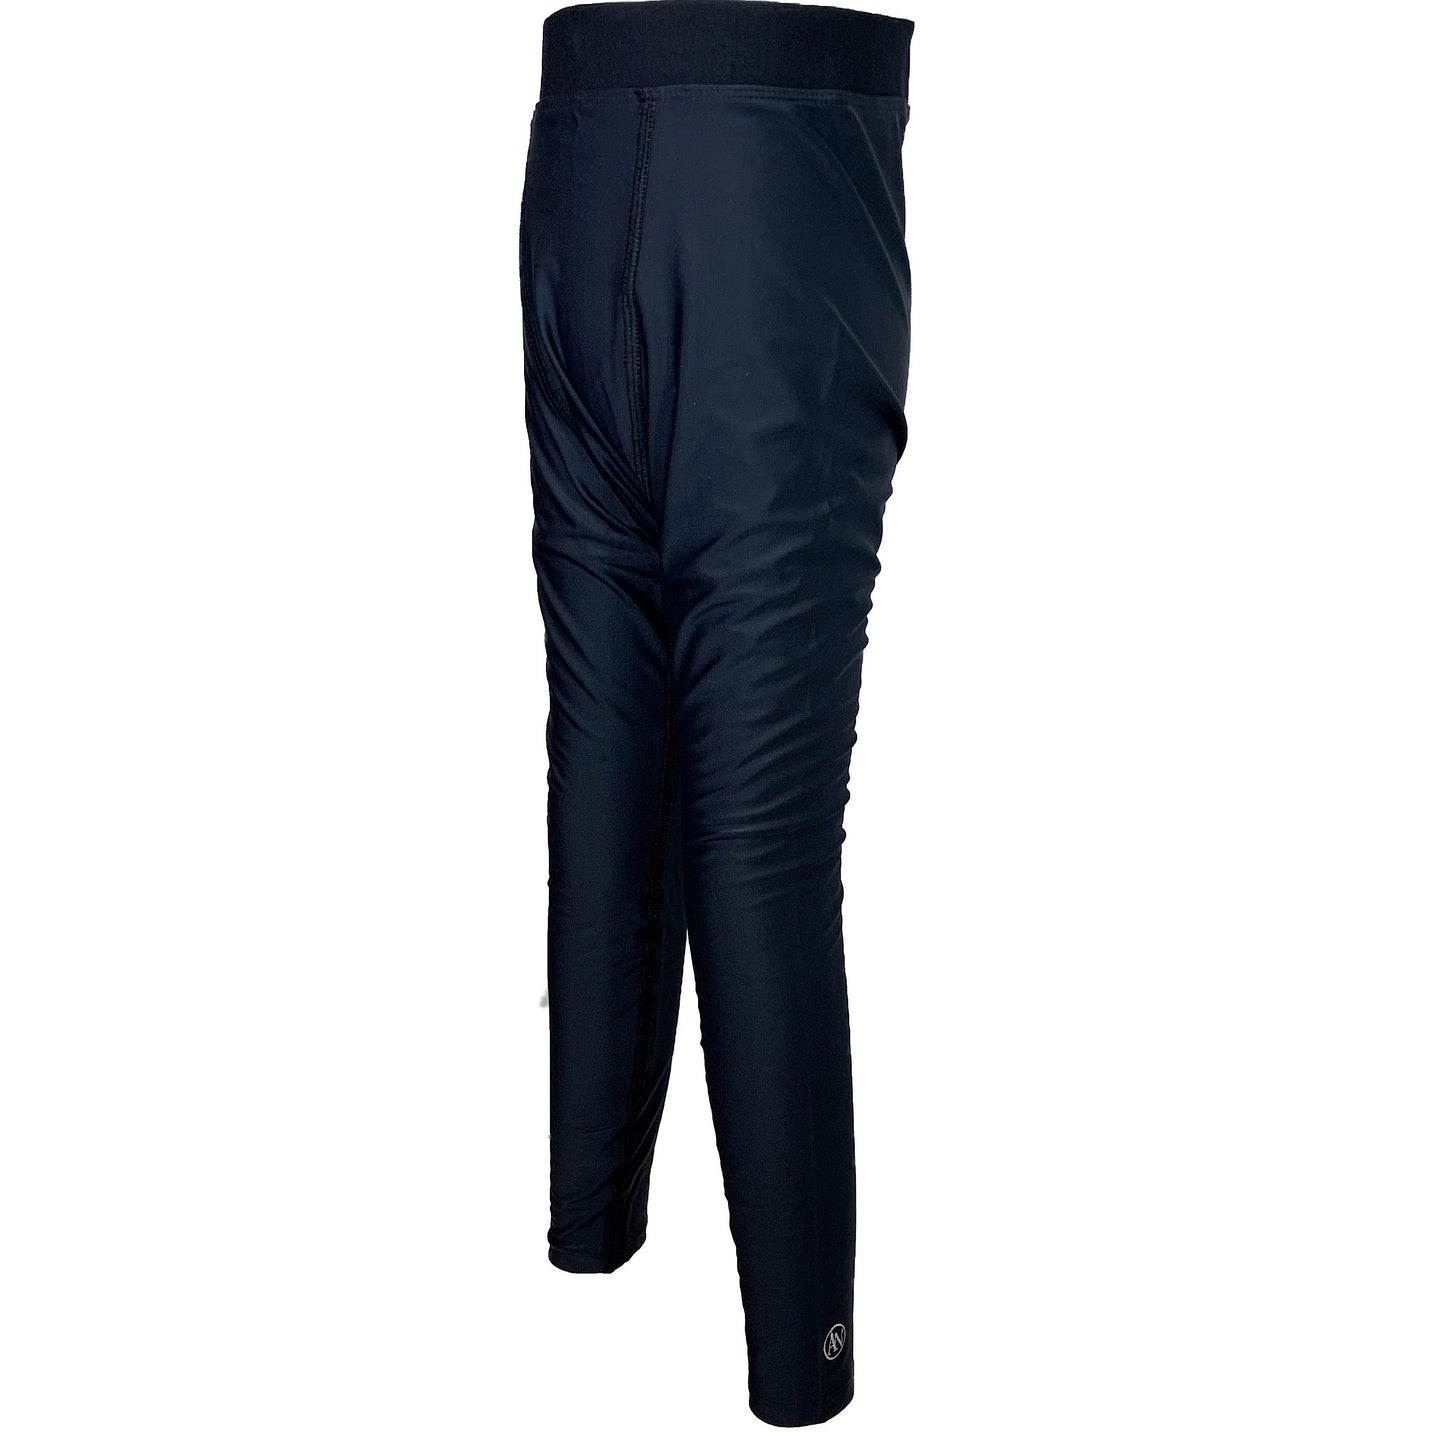 UPF Swim and Sports Legs for Boys - AMBERNOON